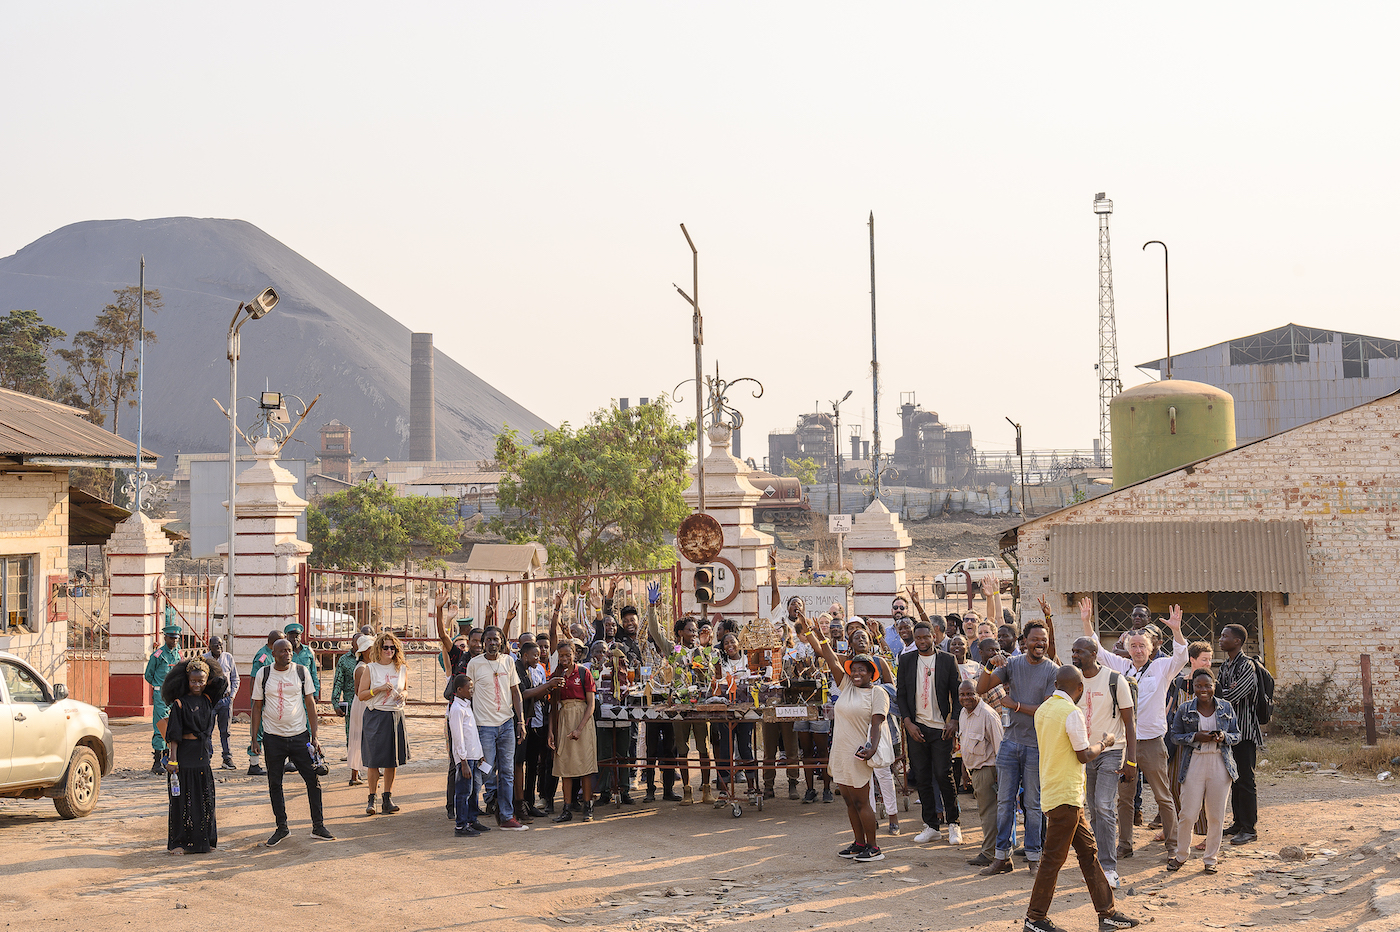 Arsène Mpiana. Description: The Biennale crowd/partakers in front of the slag heap/terril of the former Gécamines mining site.